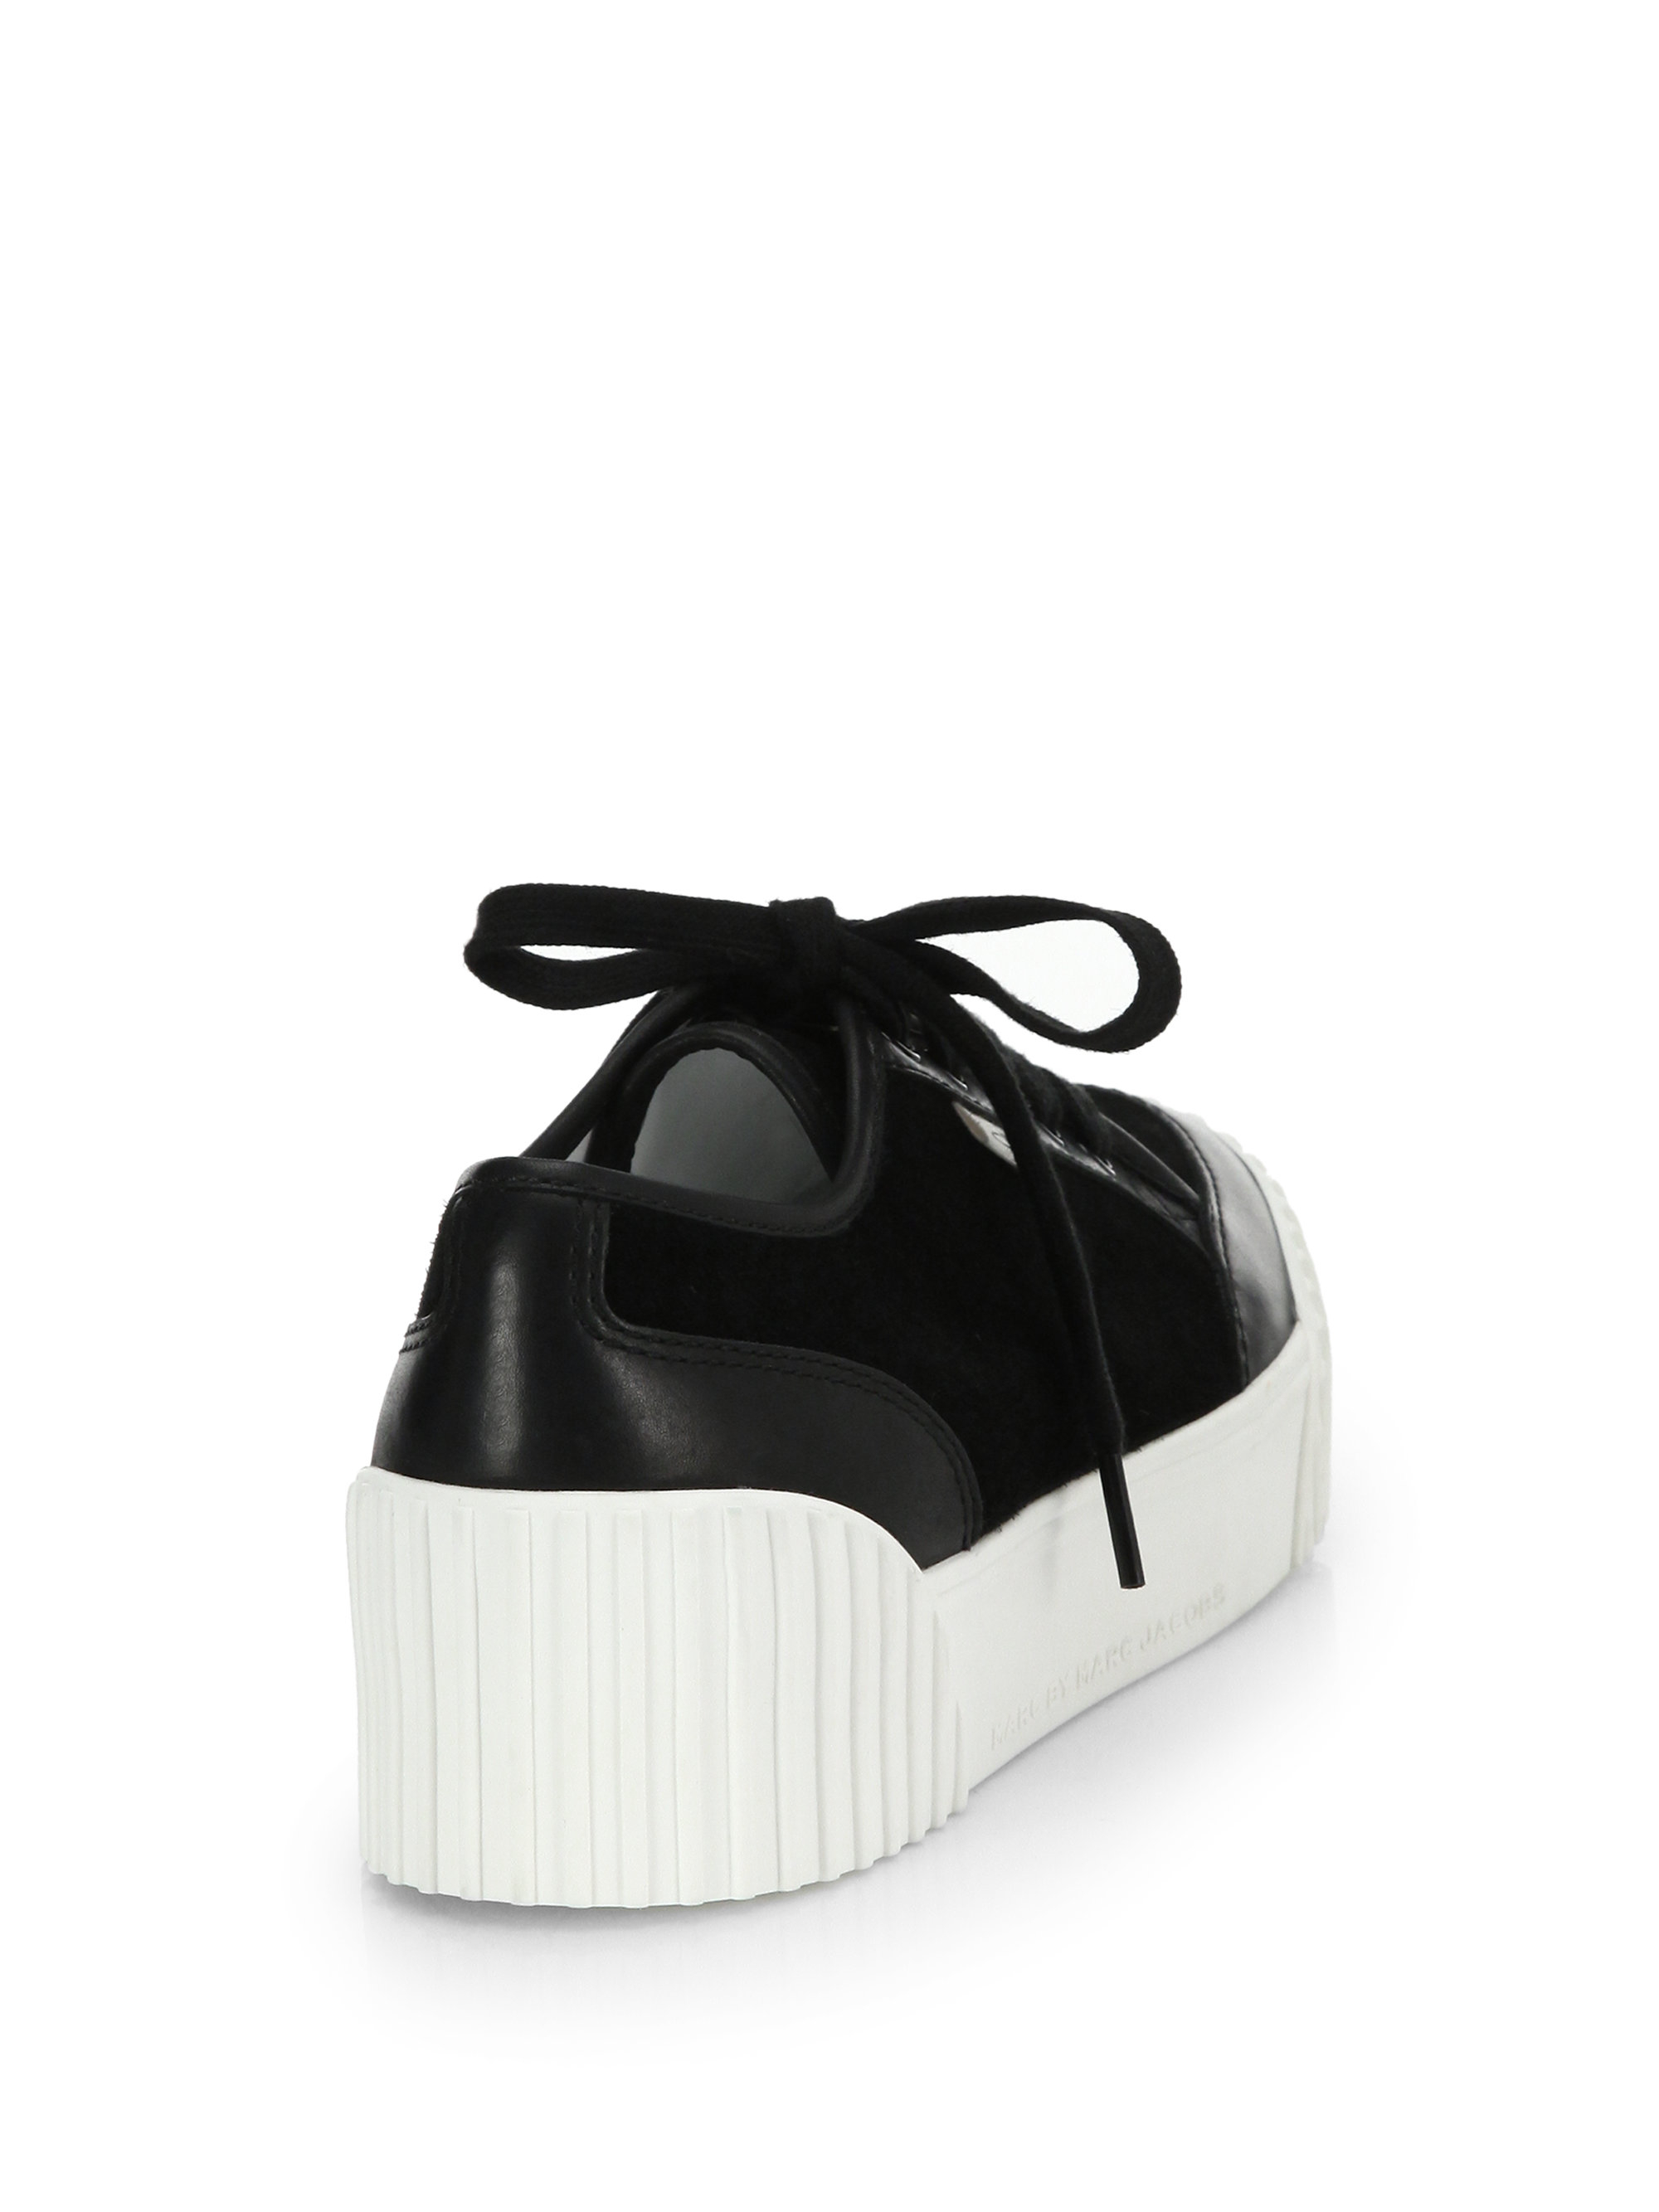 Marc By Marc Jacobs Suede Leather Platform Sneakers in Black - Lyst